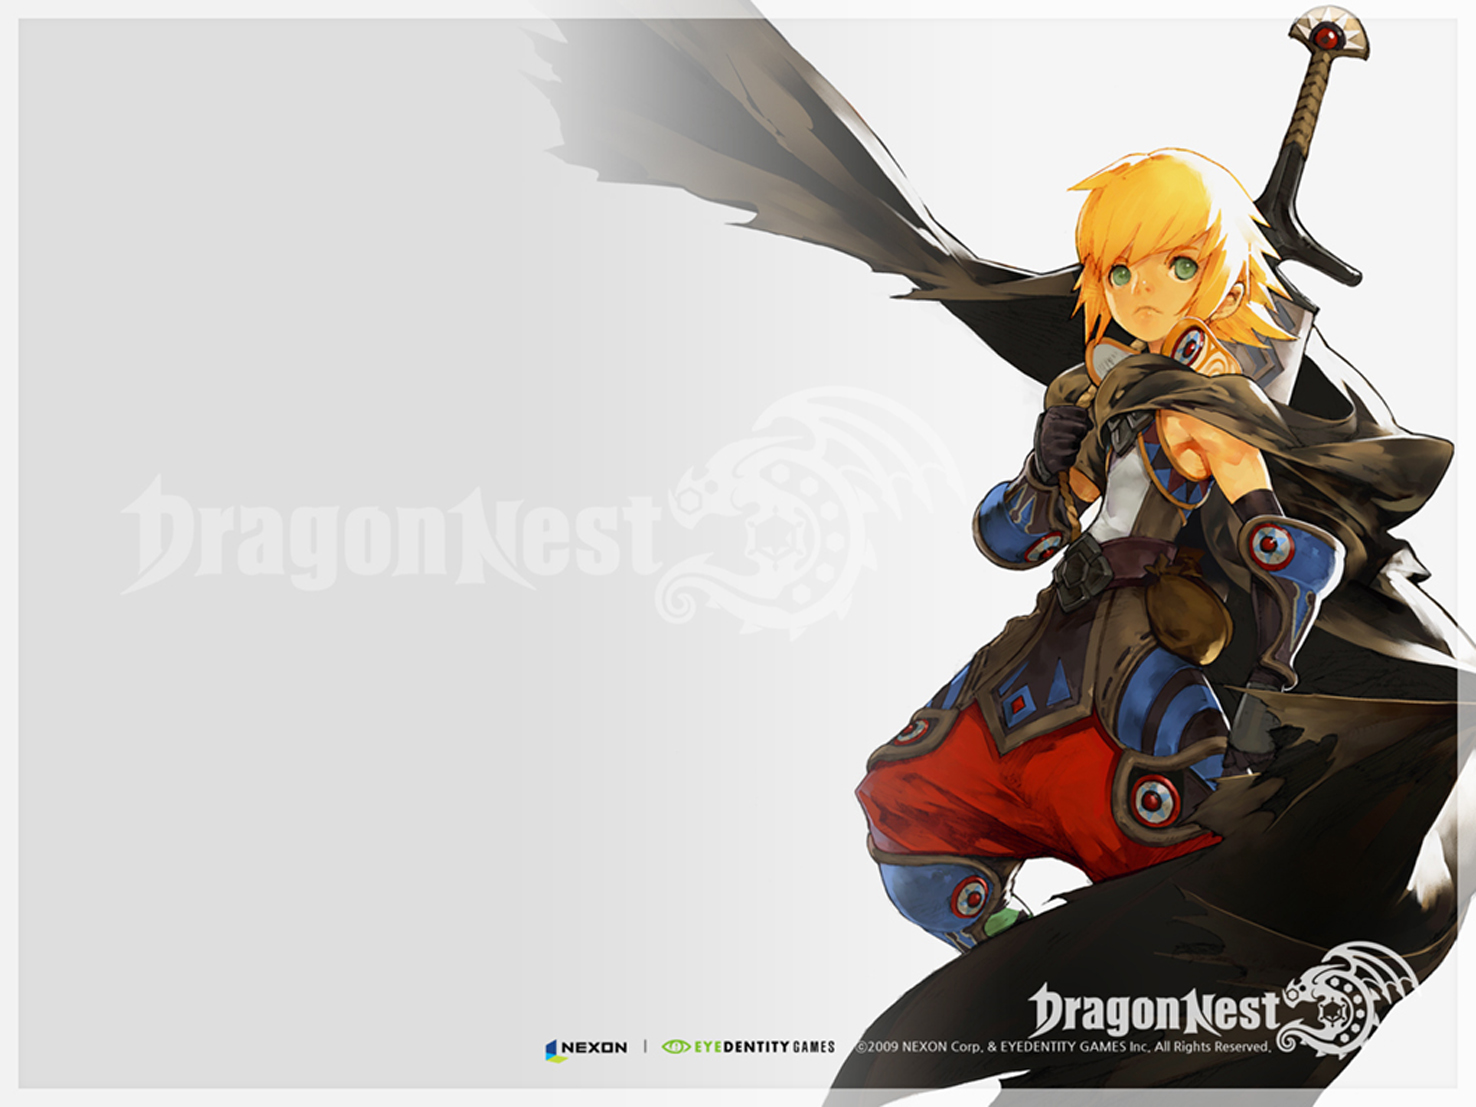 Dragon Nest Wallpaper Pictures Image